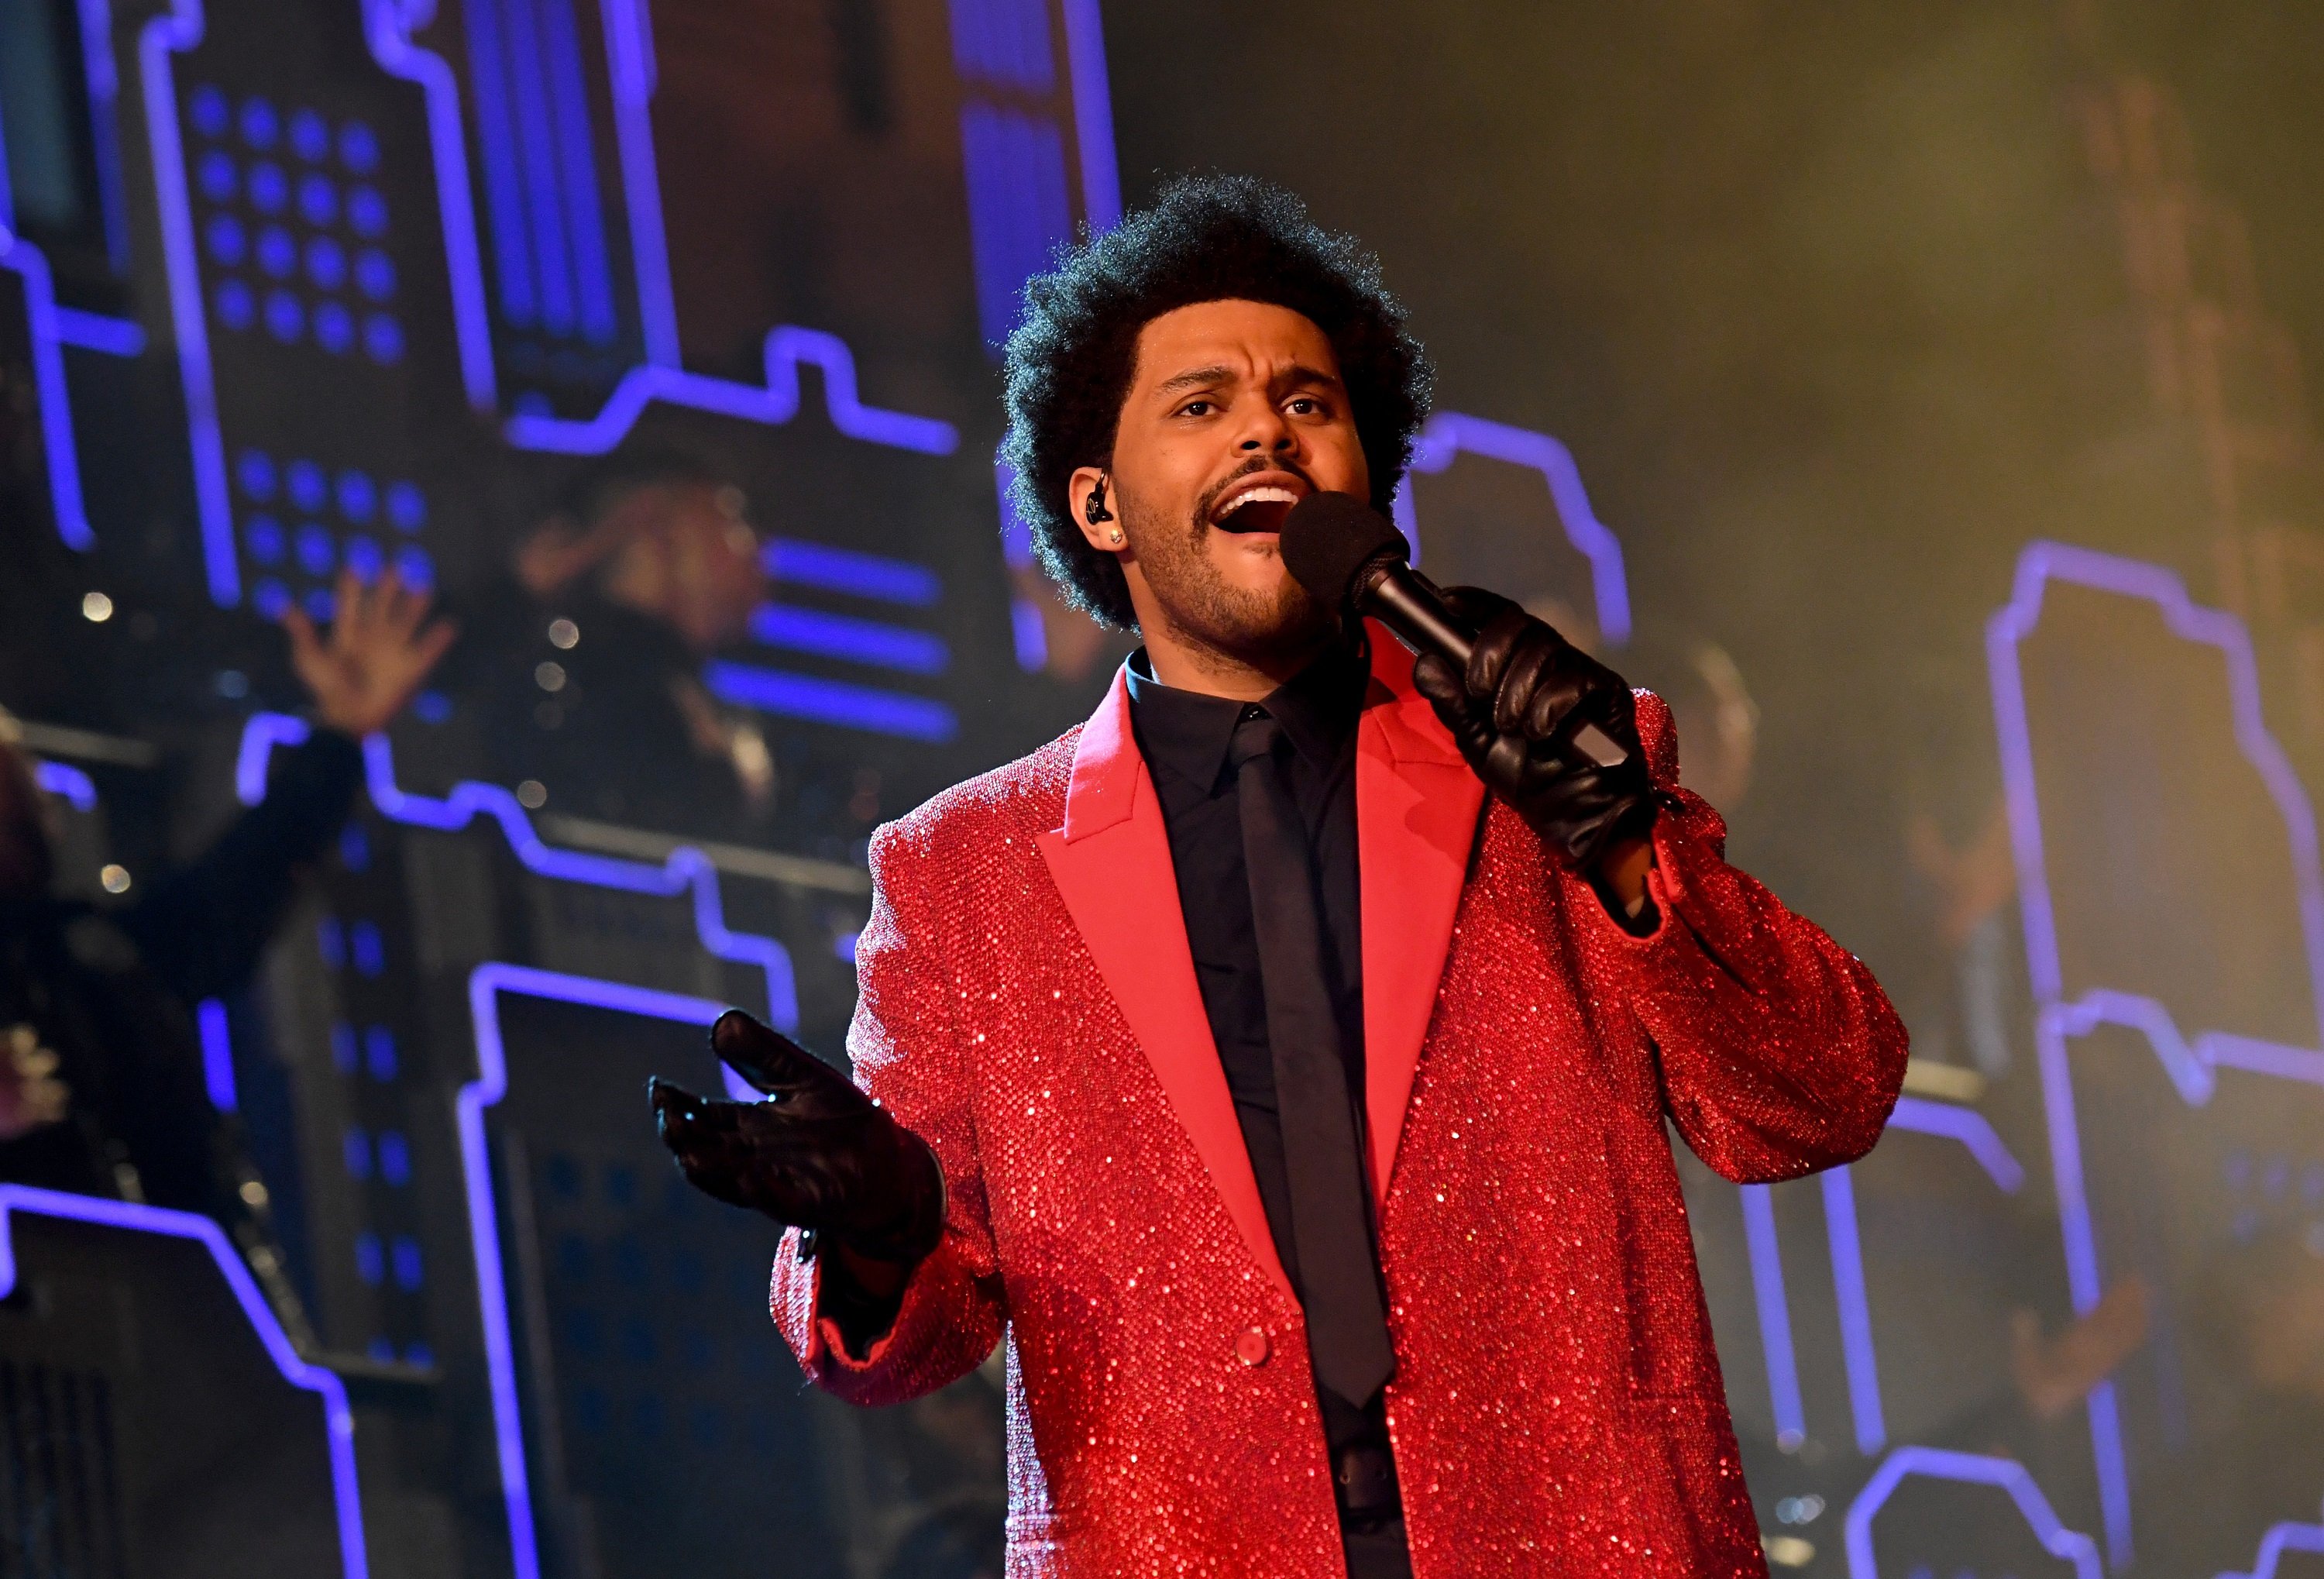 The Weeknd holds a microphone singing in a red jacket and black gloves at the Super Bowl halftime show